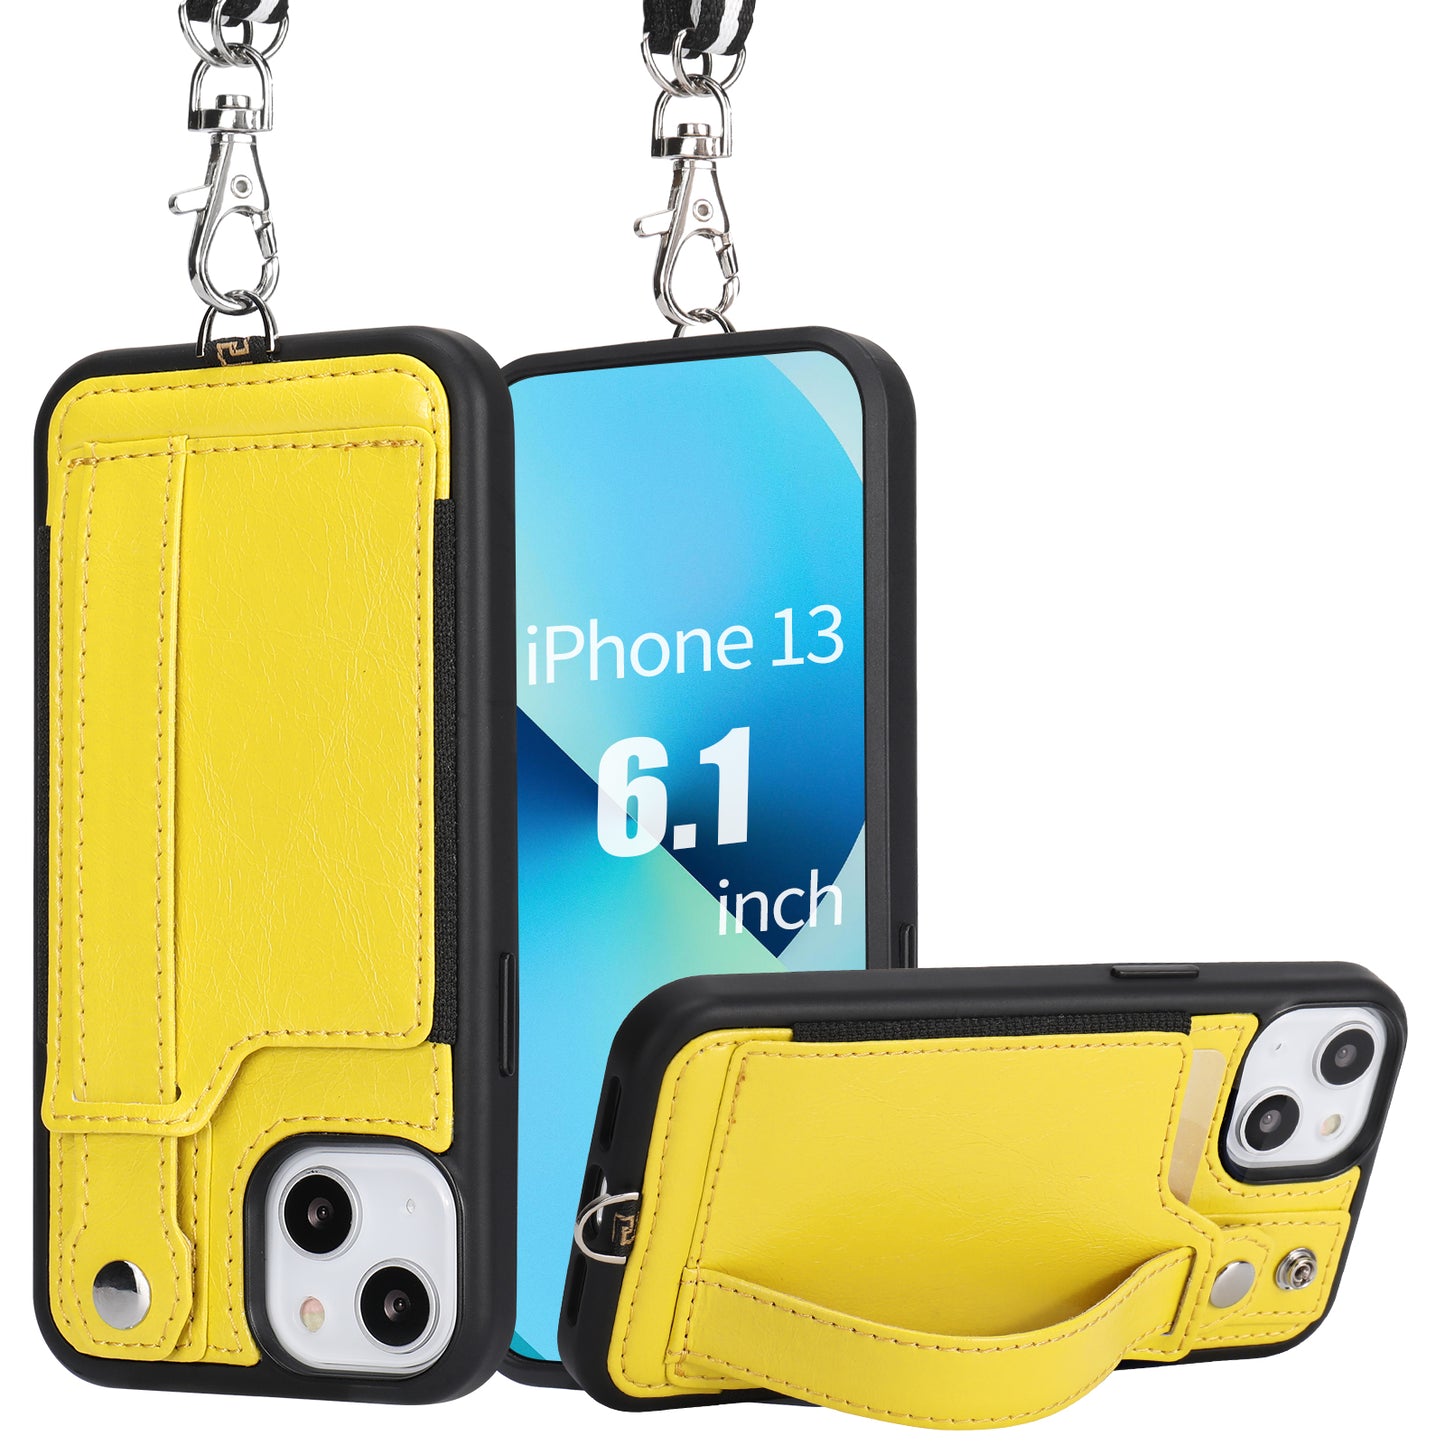 TOOVREN iPhone 13 Pro Max Case Wallet, Compatible with iPhone 13 Pro Max Case with Card Holder Kickstand Adjustable Detachable Necklace, iPhone Lanyard for iPhone 13 Pro Max 2021